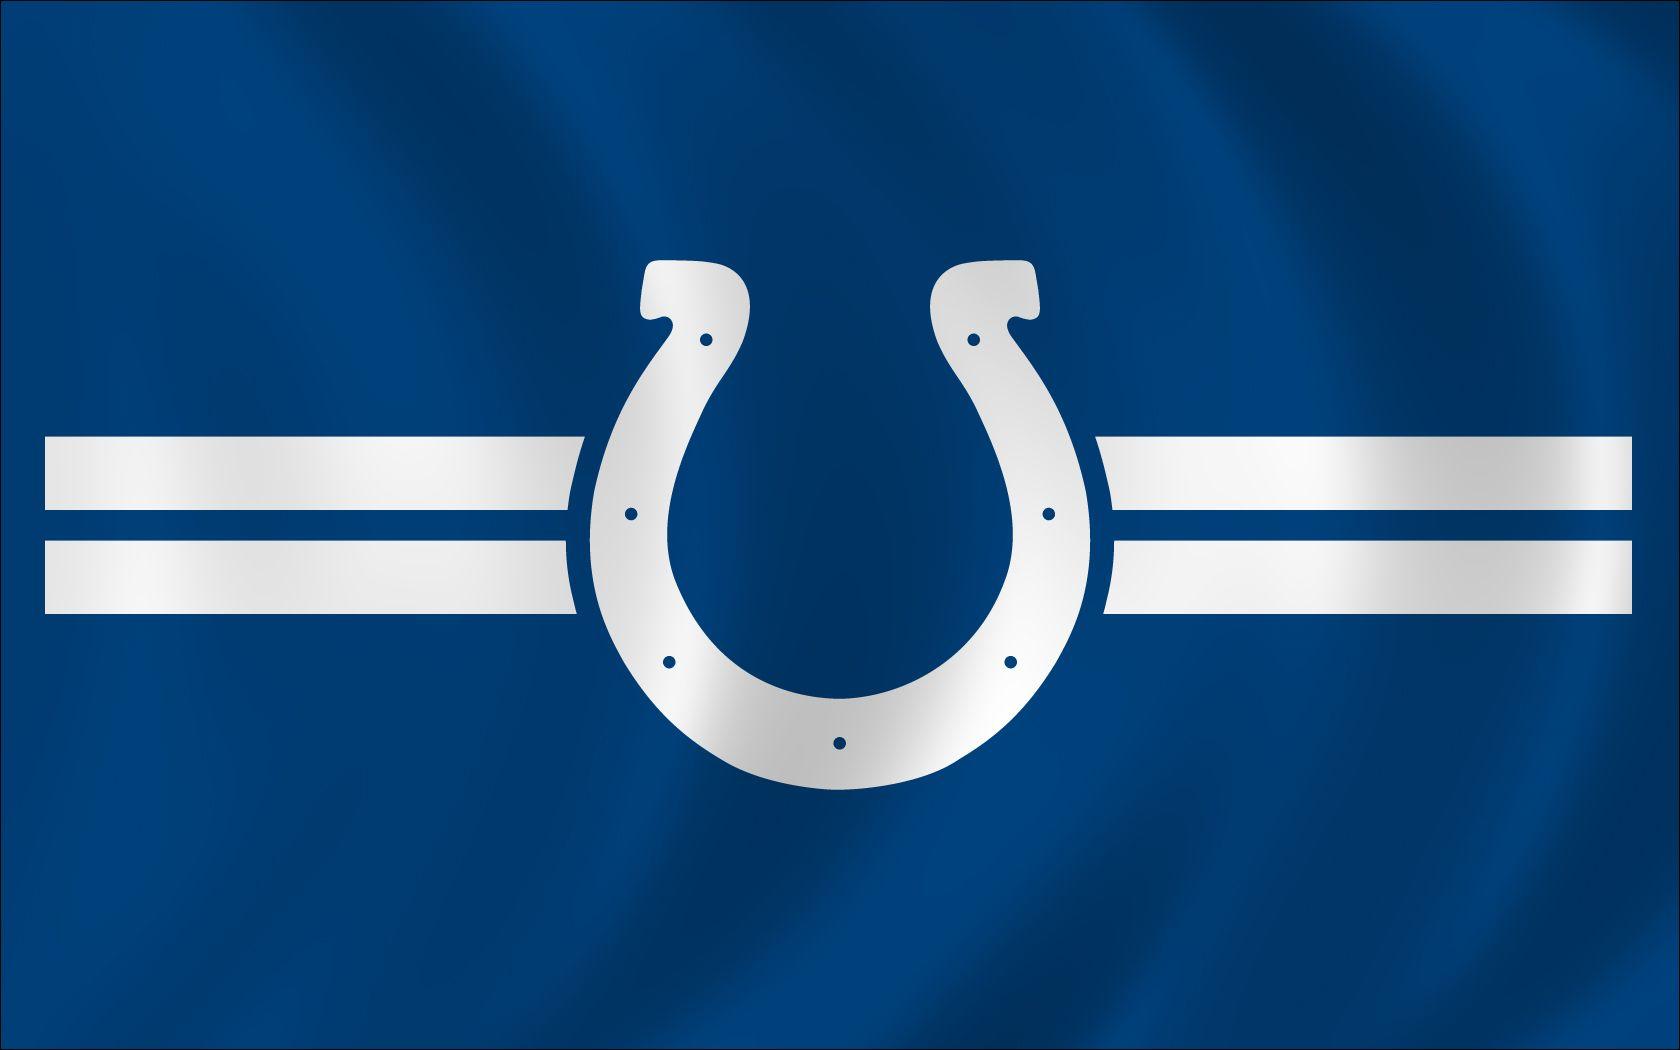 Indianapolis Colts Wallpaper Archives.com